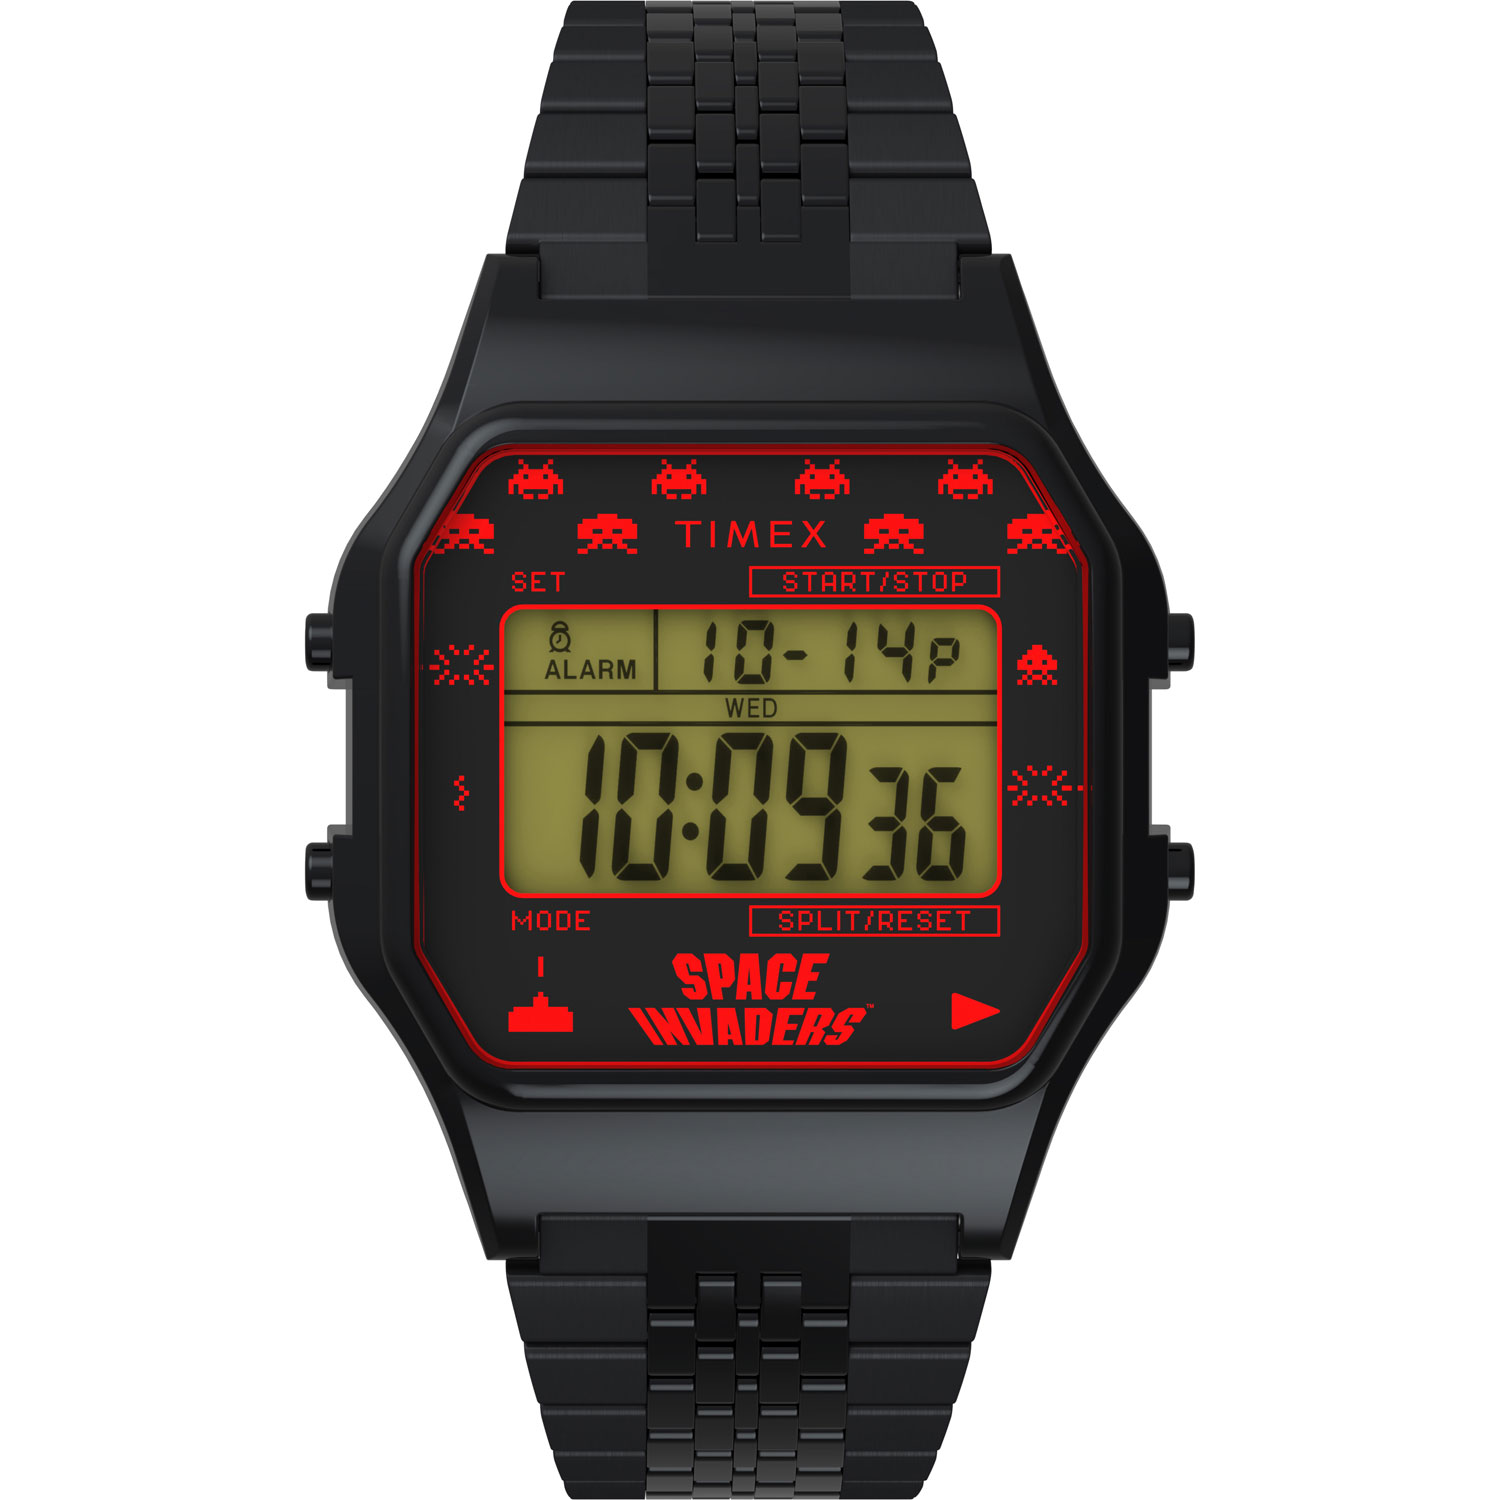 Timex T80 x Space Invaders 34mm Digital Chronograph Casual Watch - Black/Red